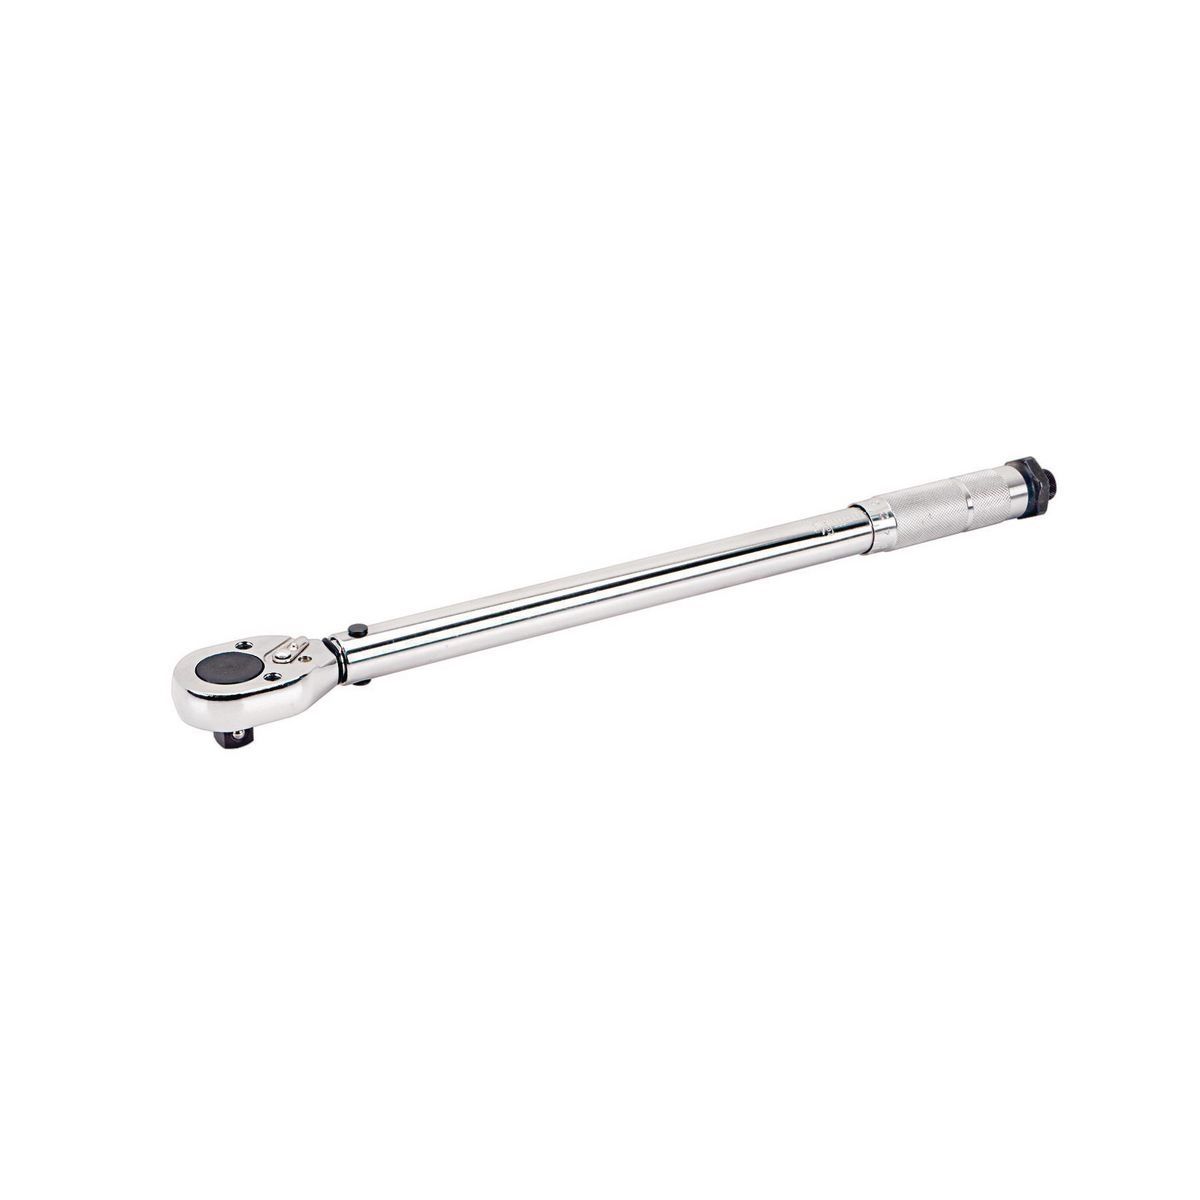 PITTSBURGH 1/2 in. Drive 20-150 ft. lb. Click Torque Wrench